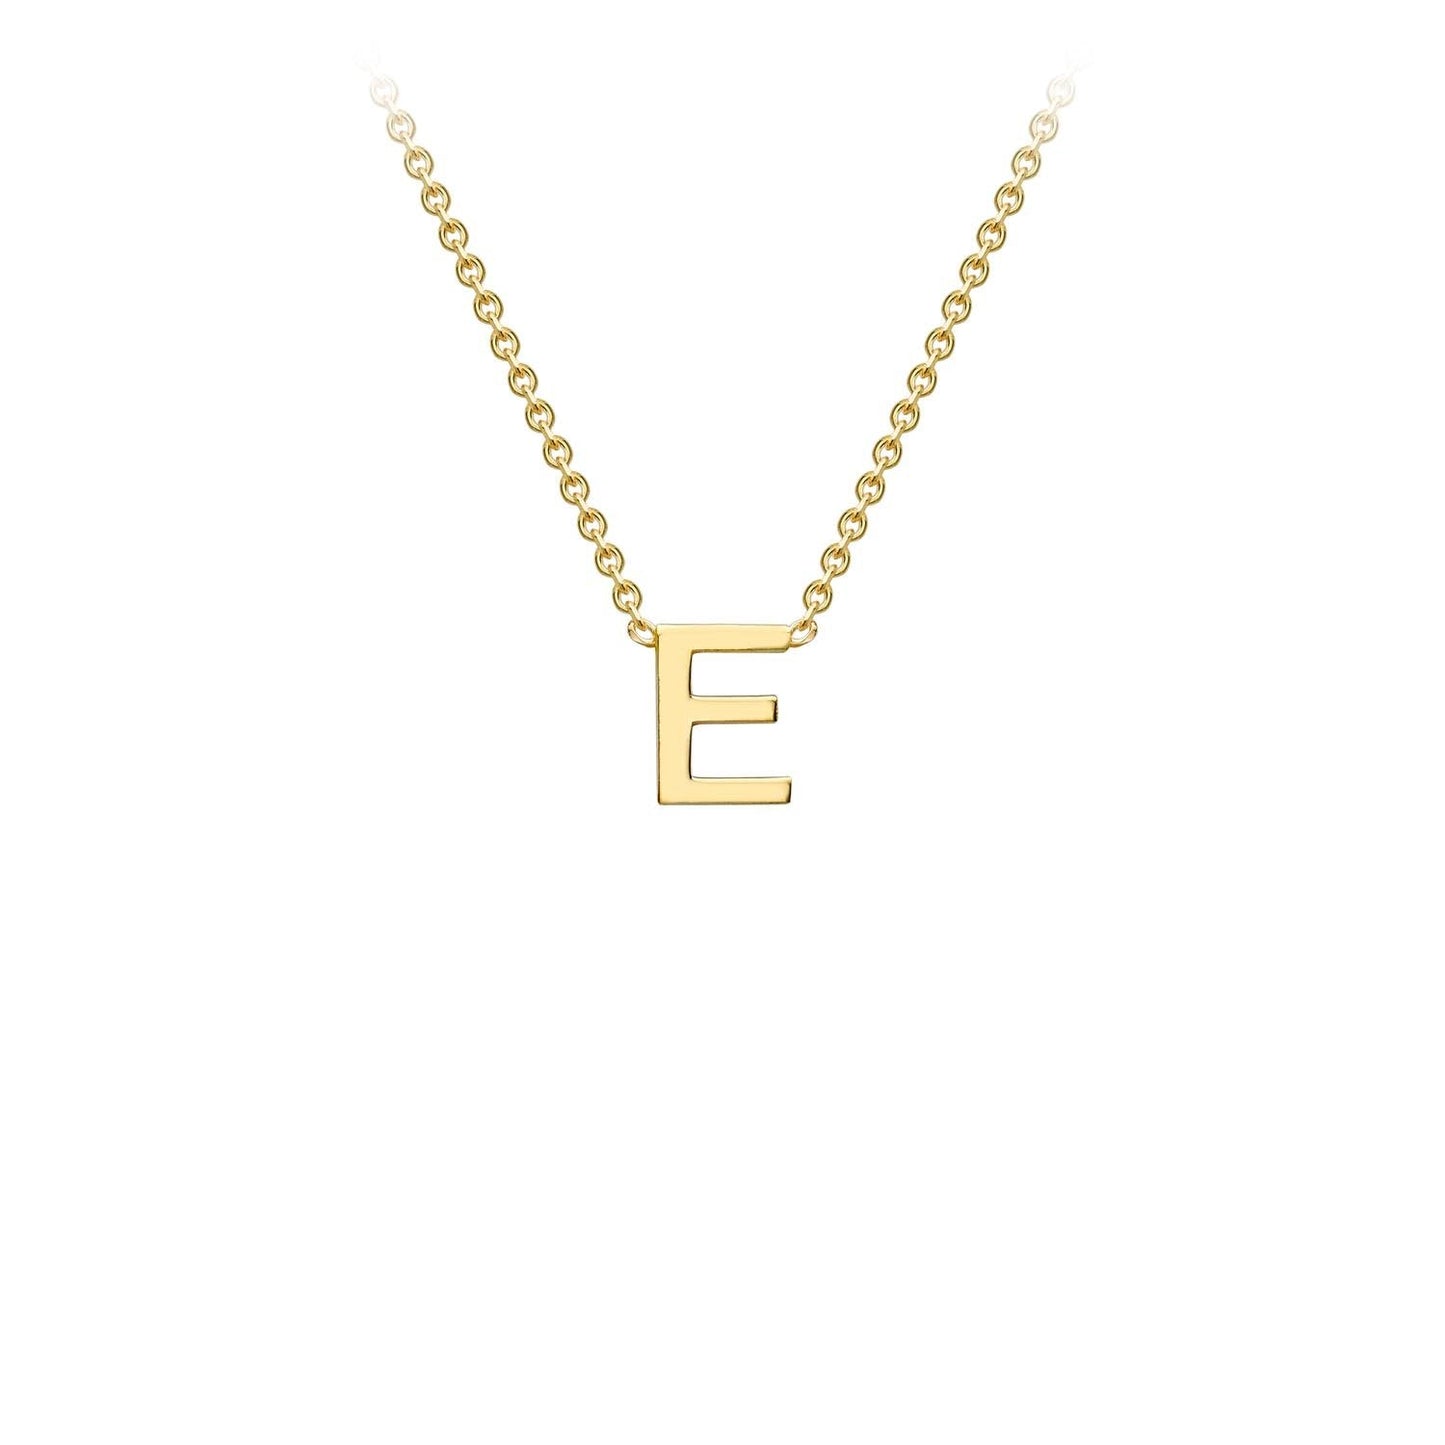 9K Yellow Gold 'E' Initial Adjustable Letter Necklace 38/43cm